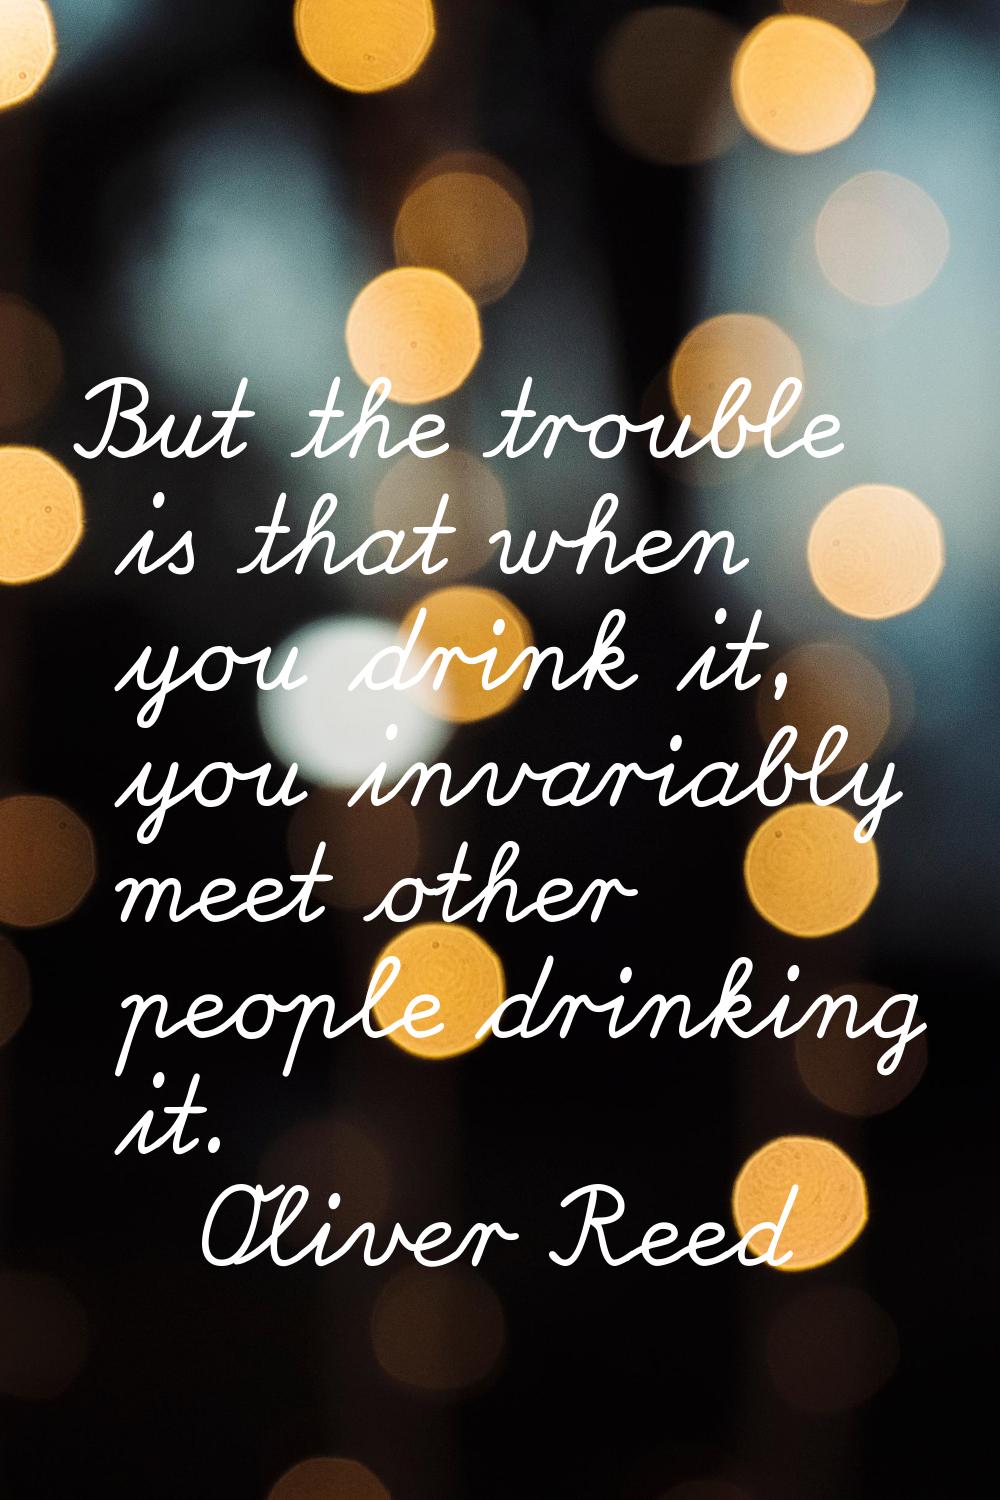 But the trouble is that when you drink it, you invariably meet other people drinking it.